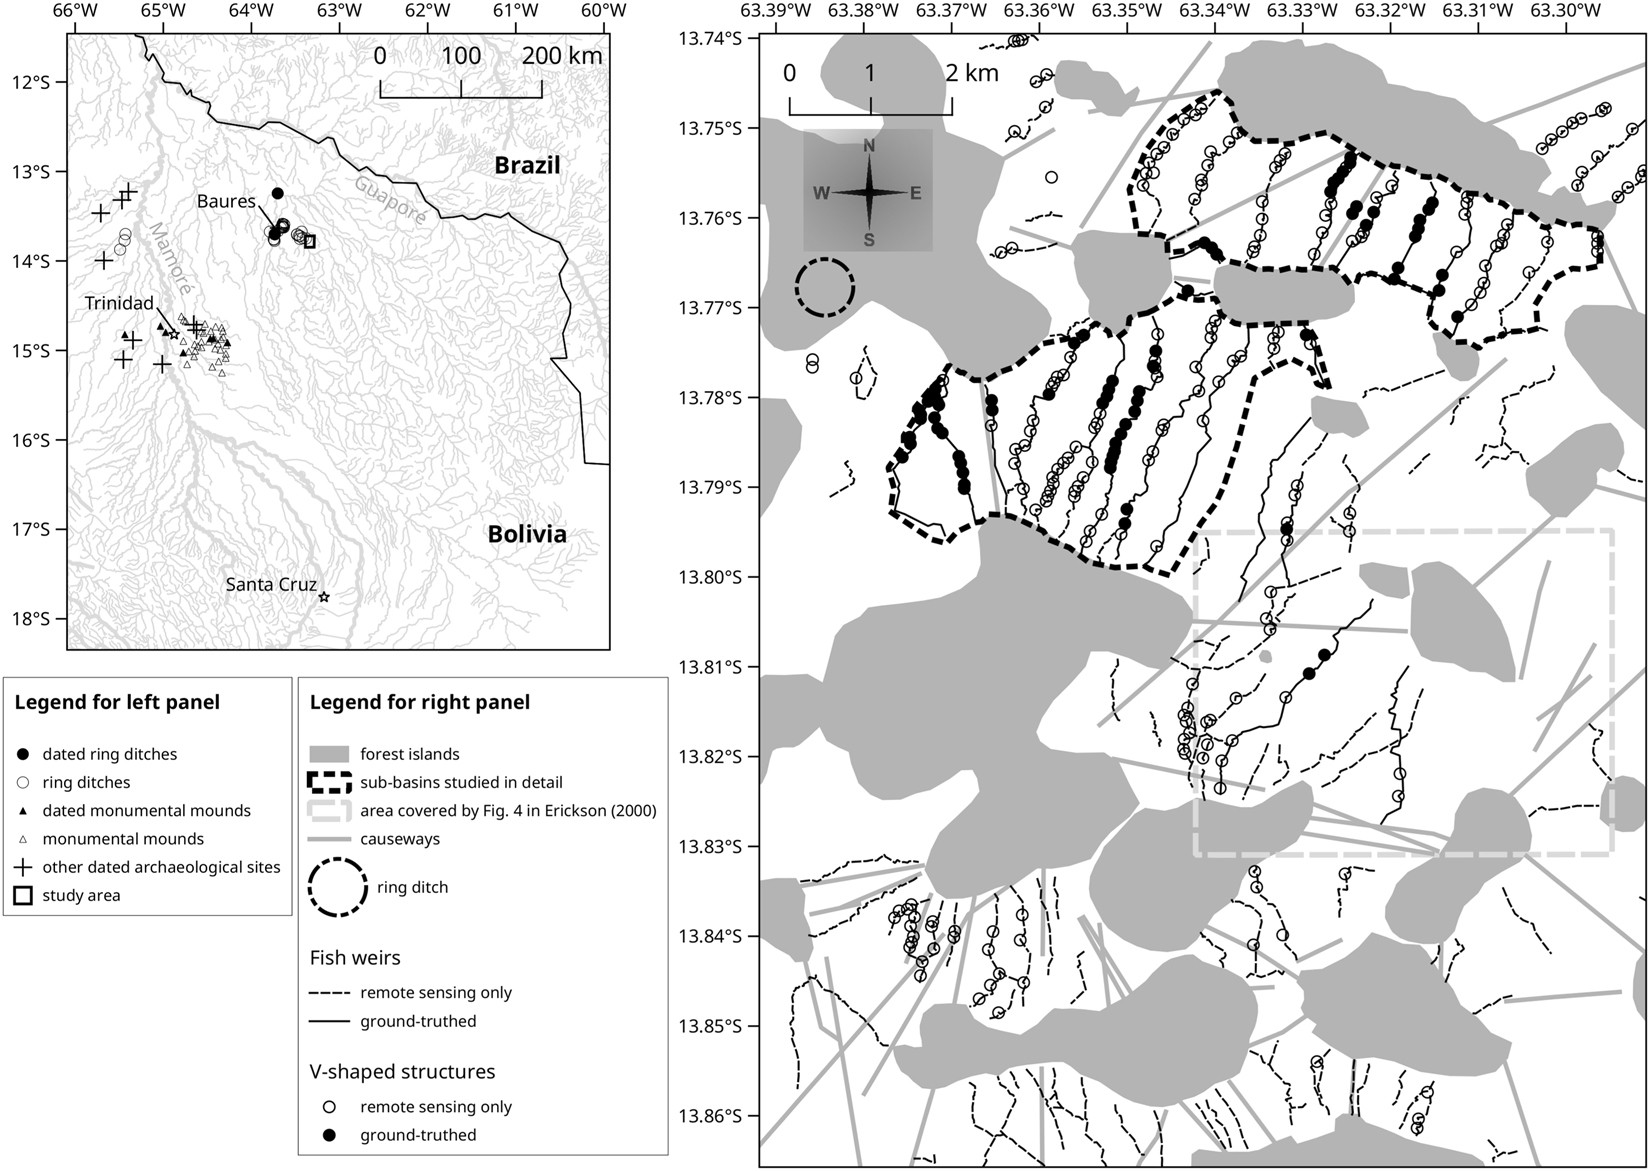 The unique functioning of a pre-Columbian ian floodplain fishery